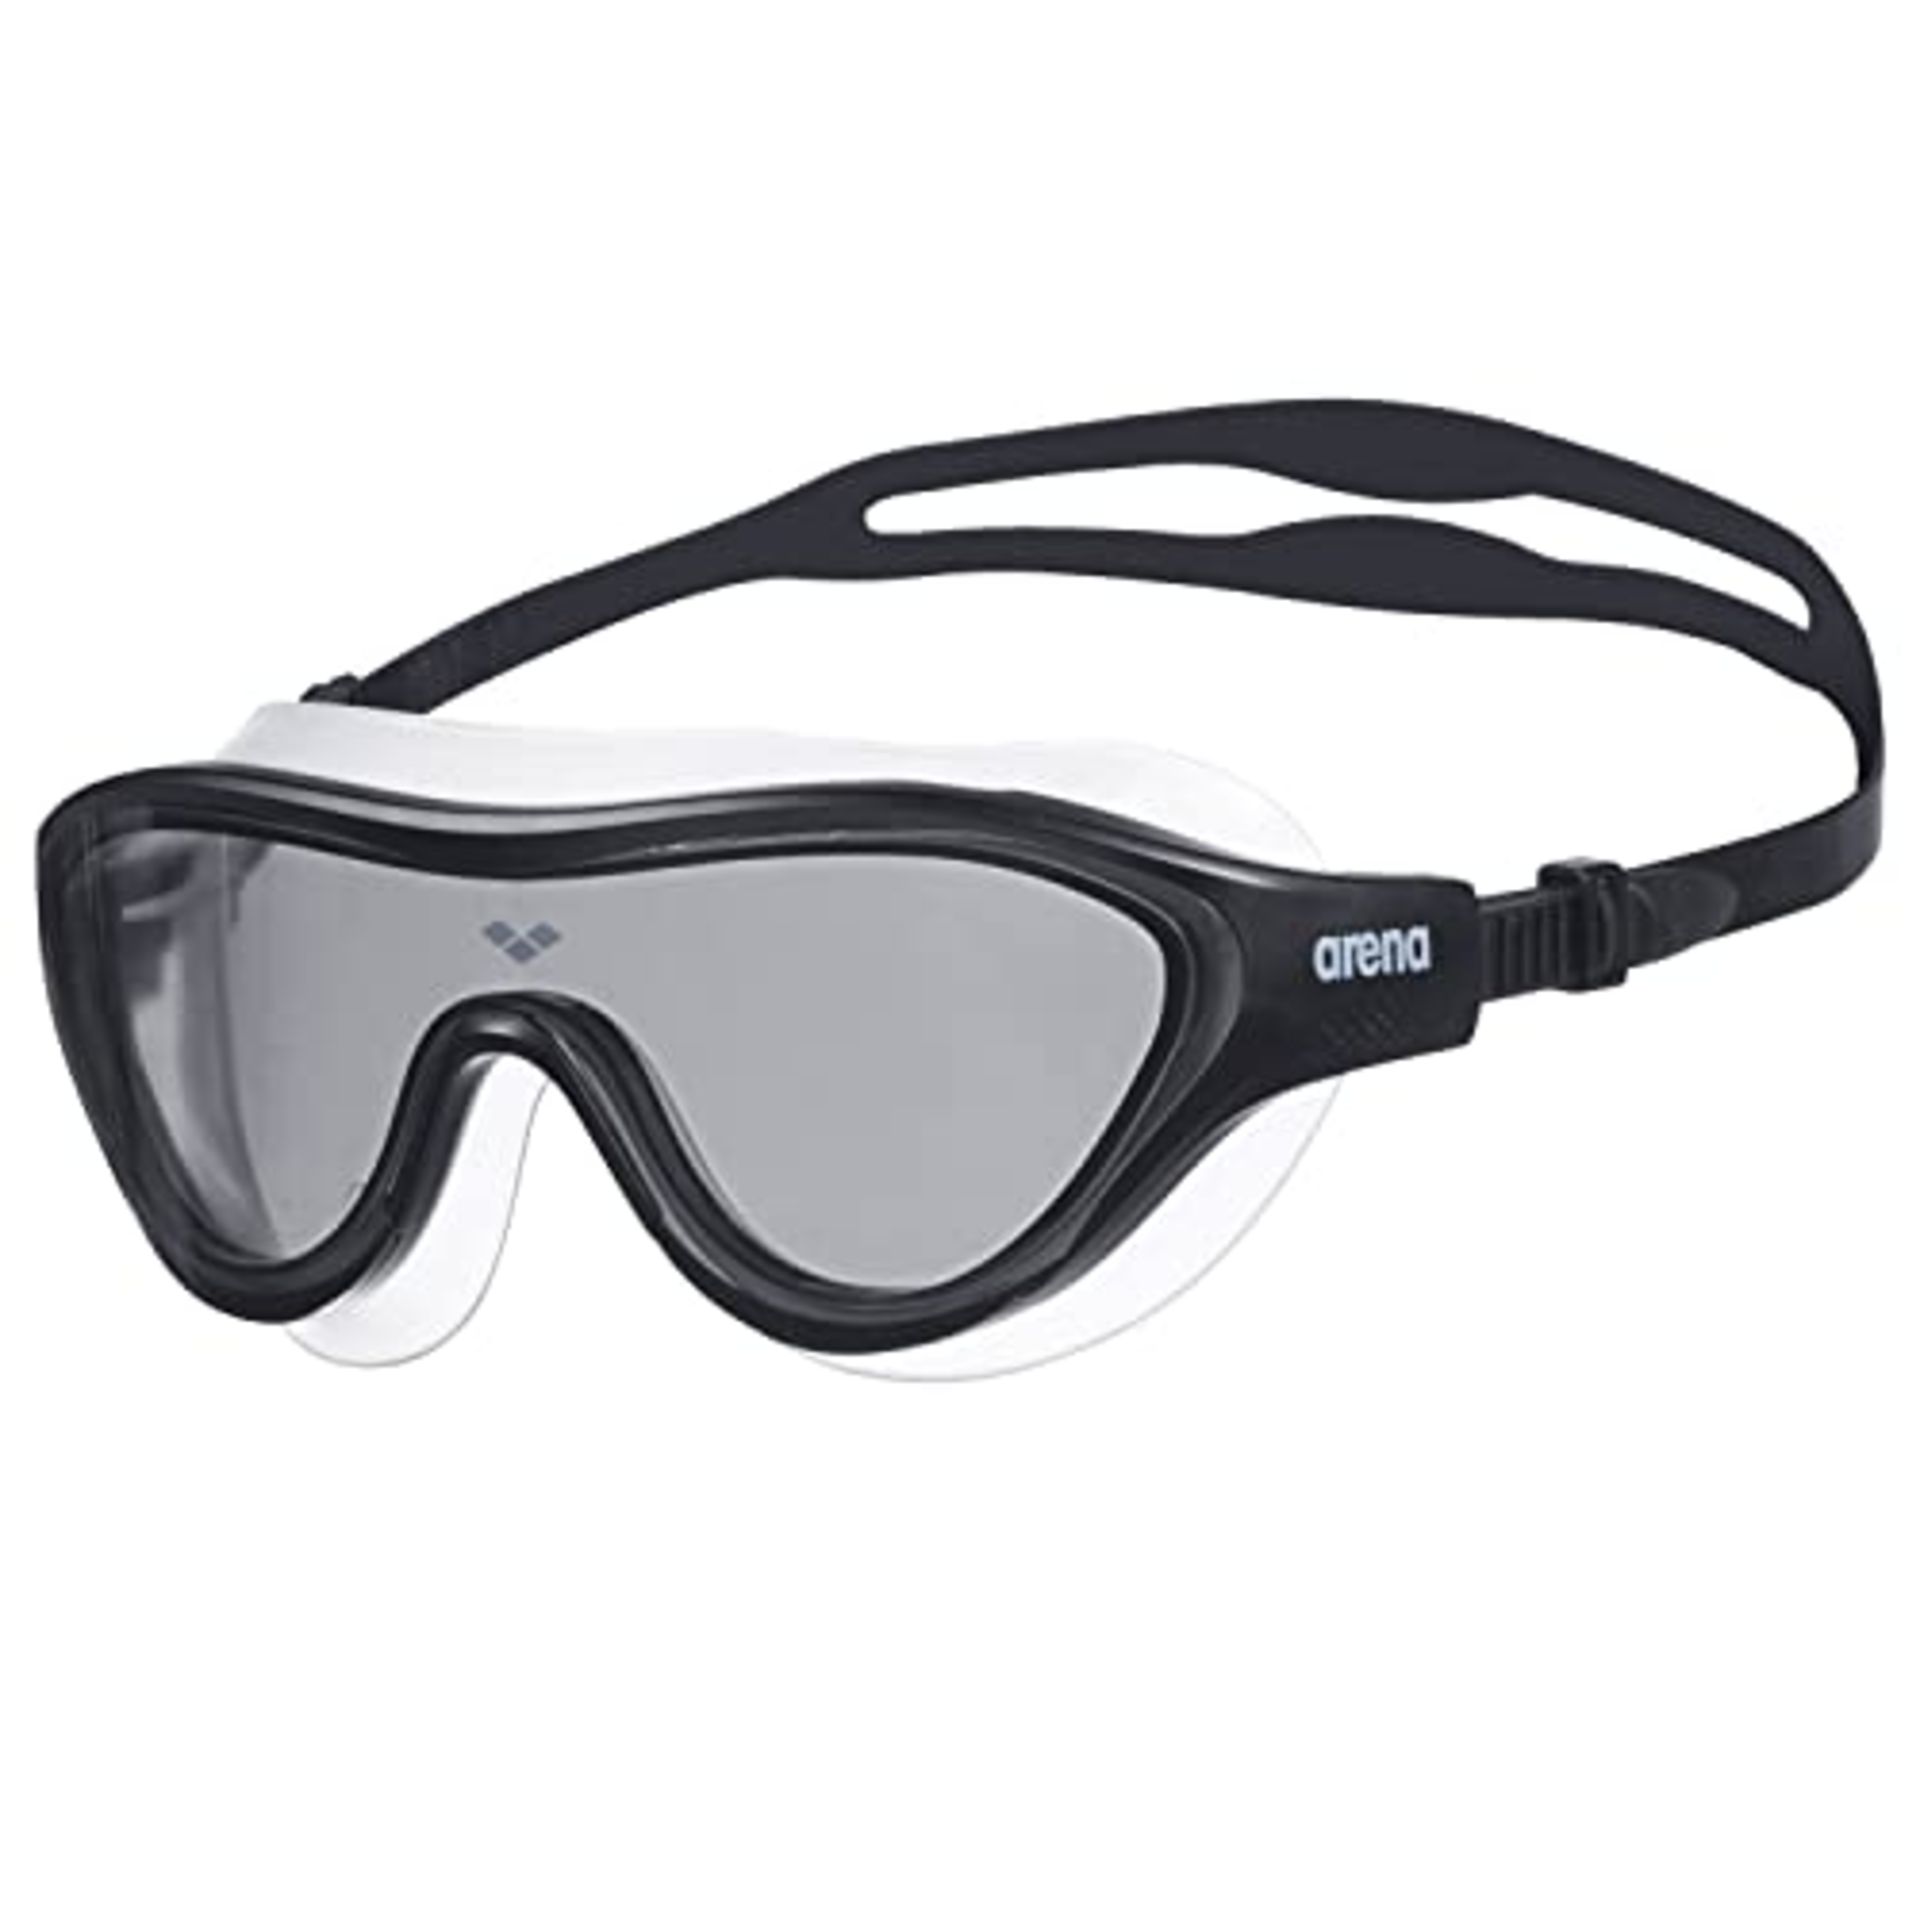 Adult Swimming Goggles The One Mask, Anti-fog, Unisex, Mask with Wide Lenses, UV Prote